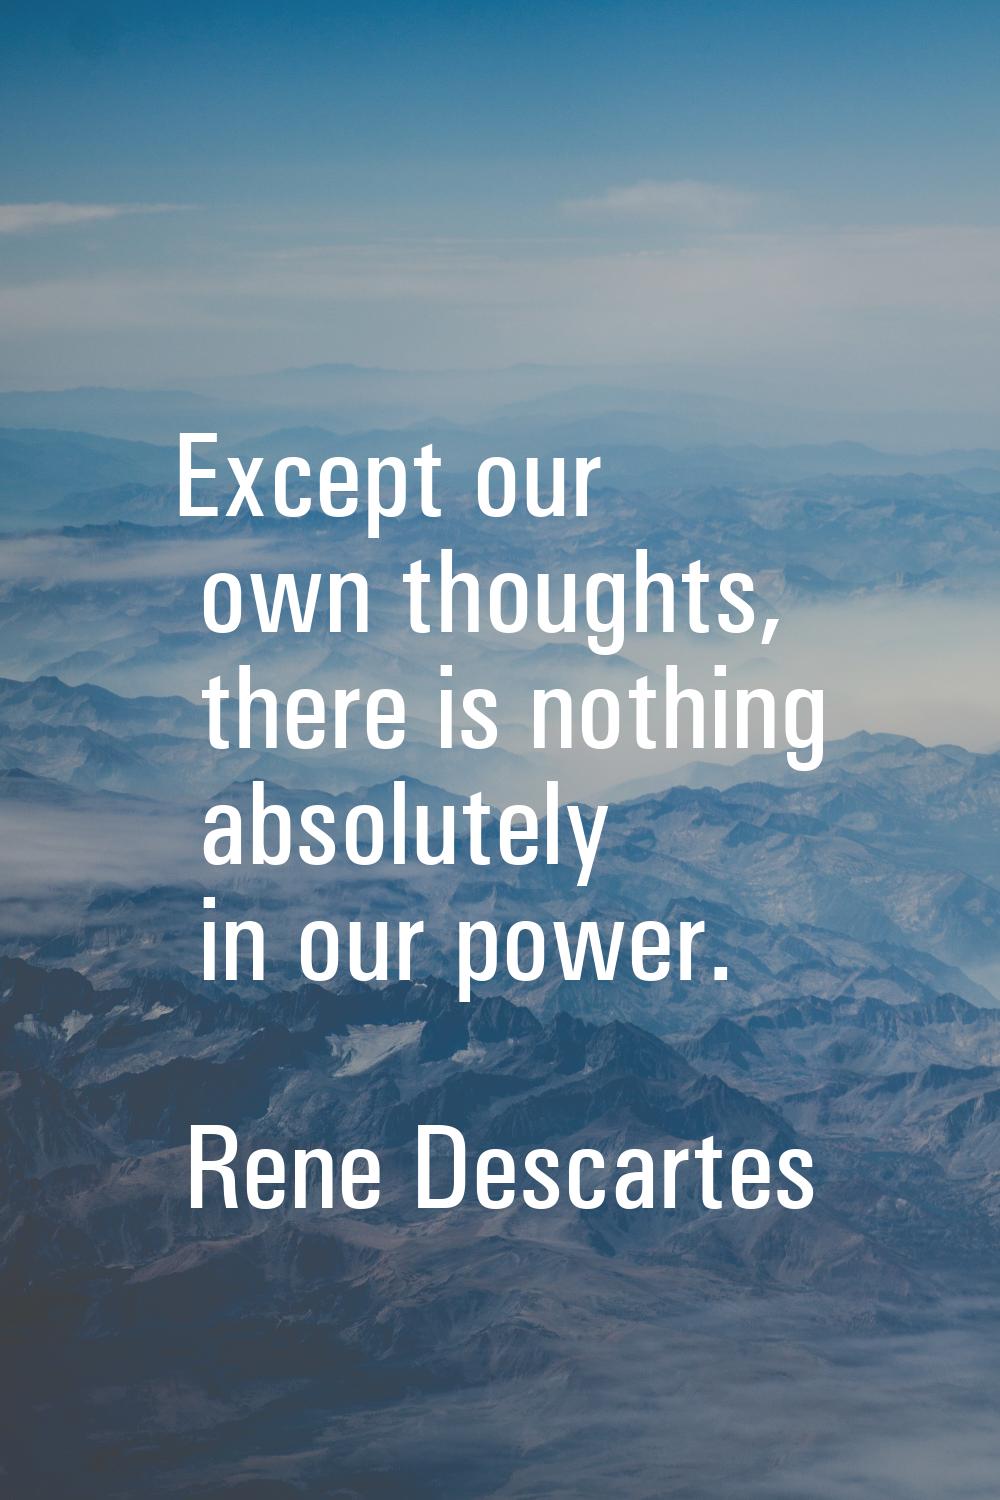 Except our own thoughts, there is nothing absolutely in our power.